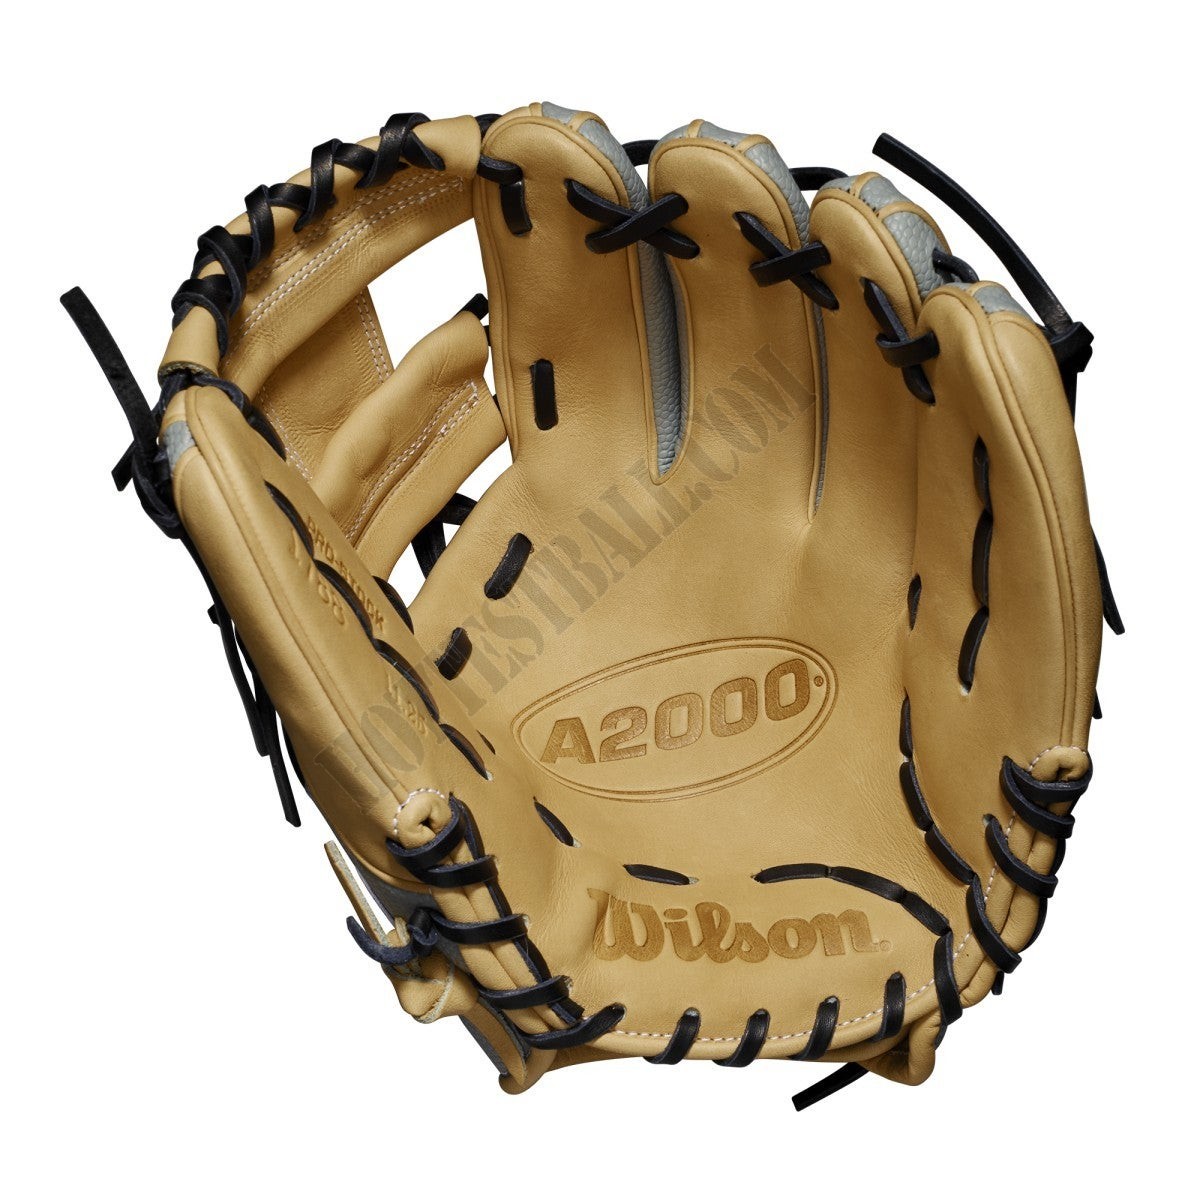 2019 A2000 1788 SuperSkin 11.25" Infield Baseball Glove - Right Hand Throw ● Wilson Promotions - -2